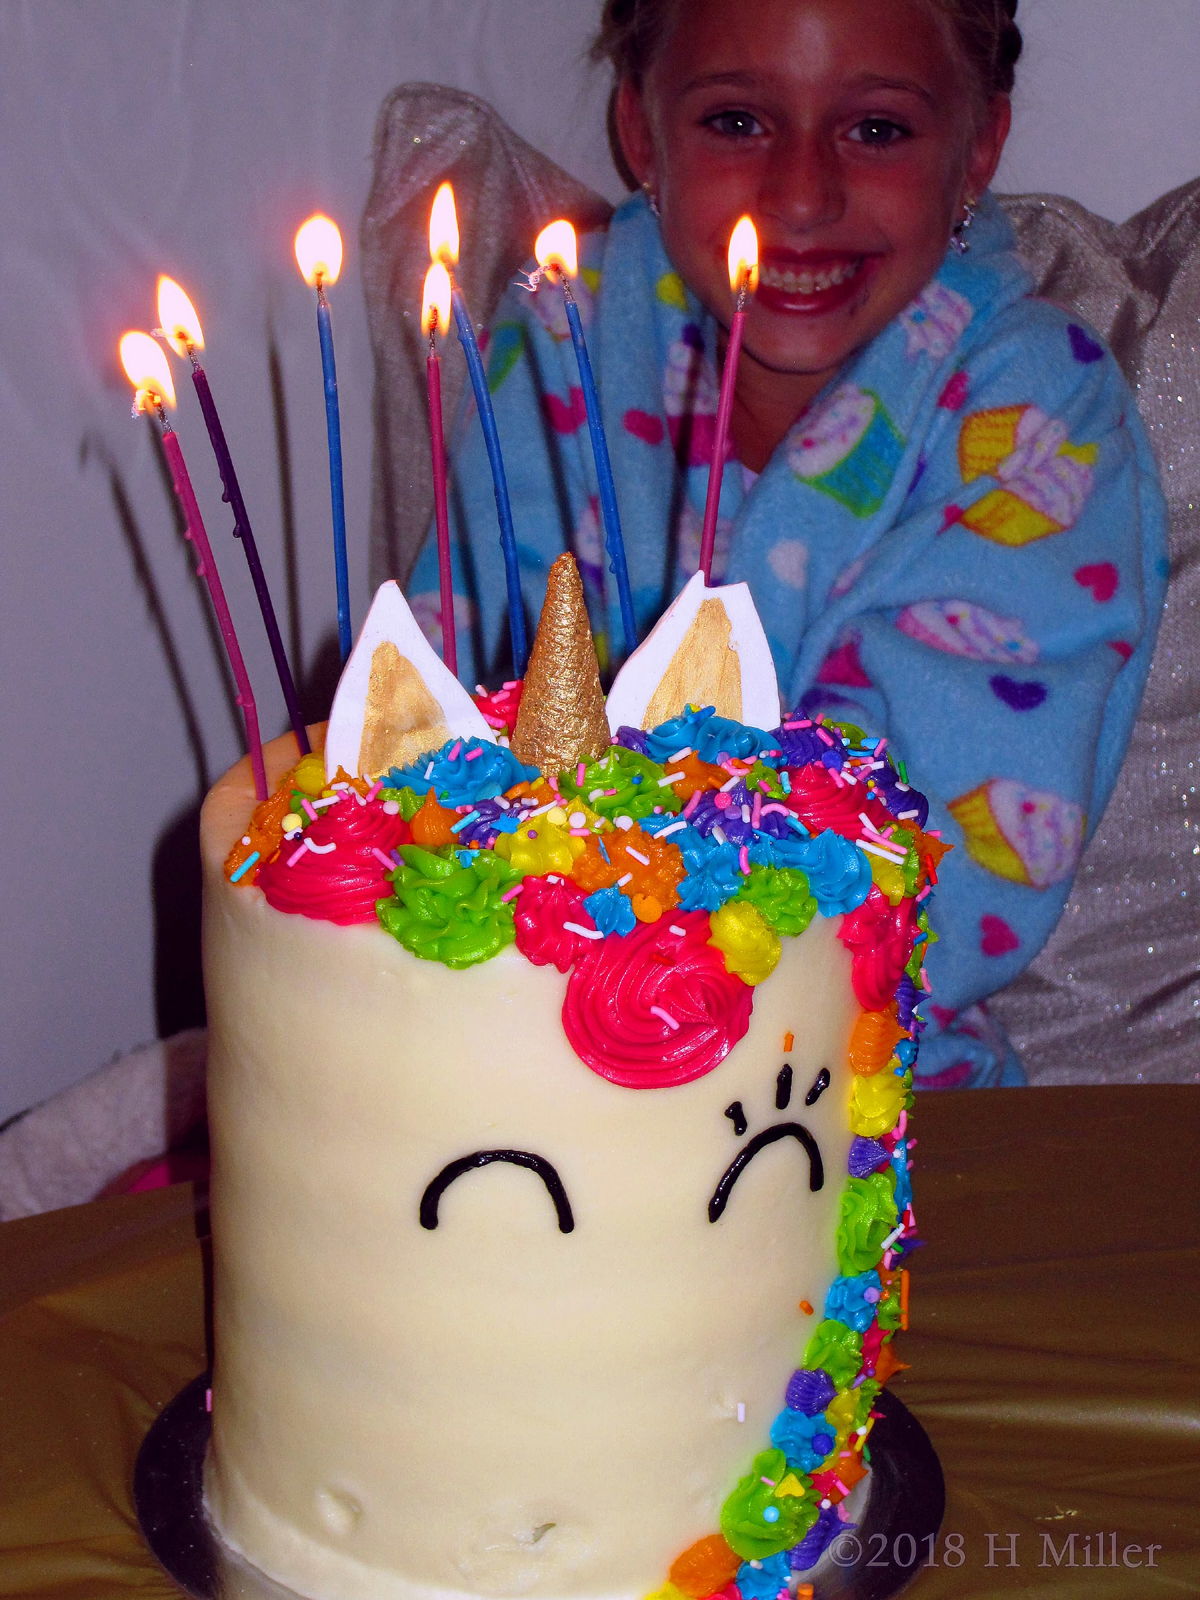 Yummy Unicorn Birthday Cake With Lighted Candles. 